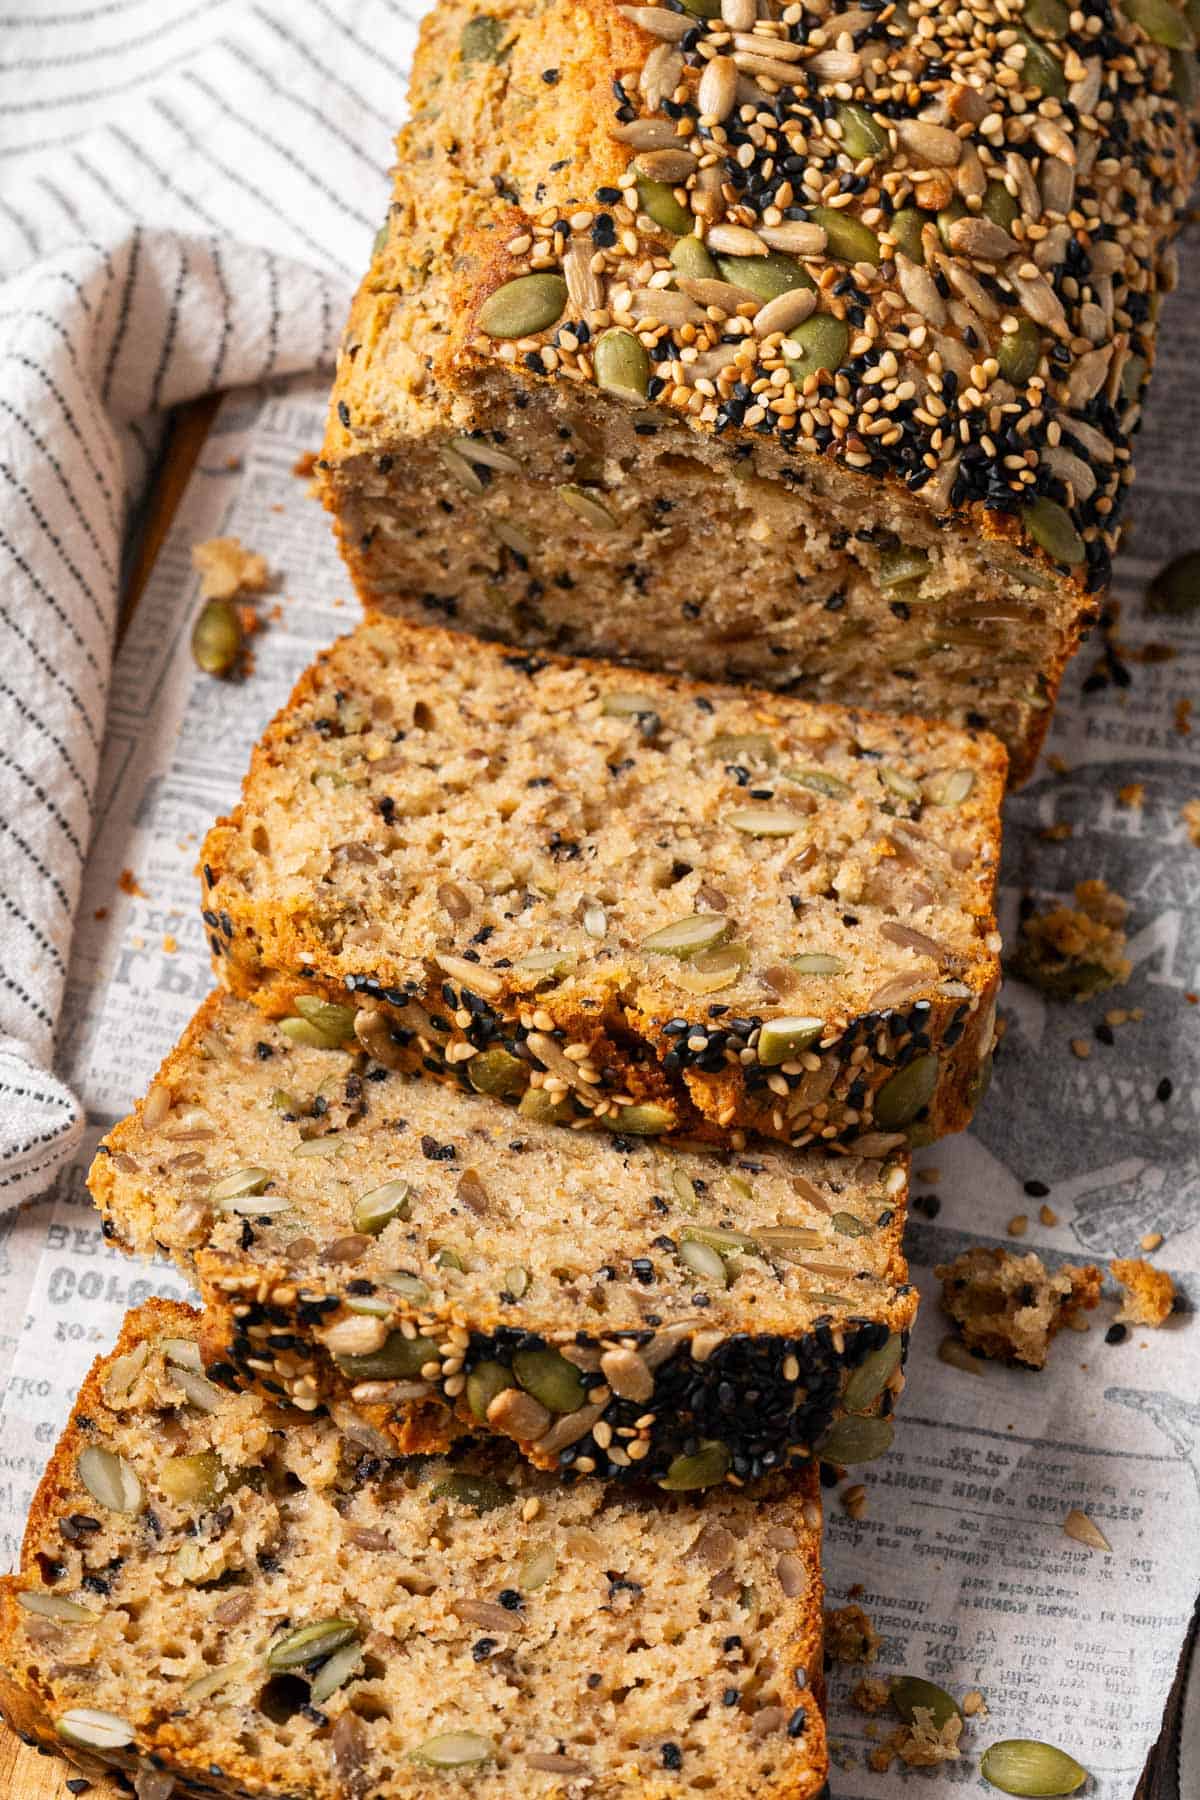 Slices of no-knead multi-seed bread.